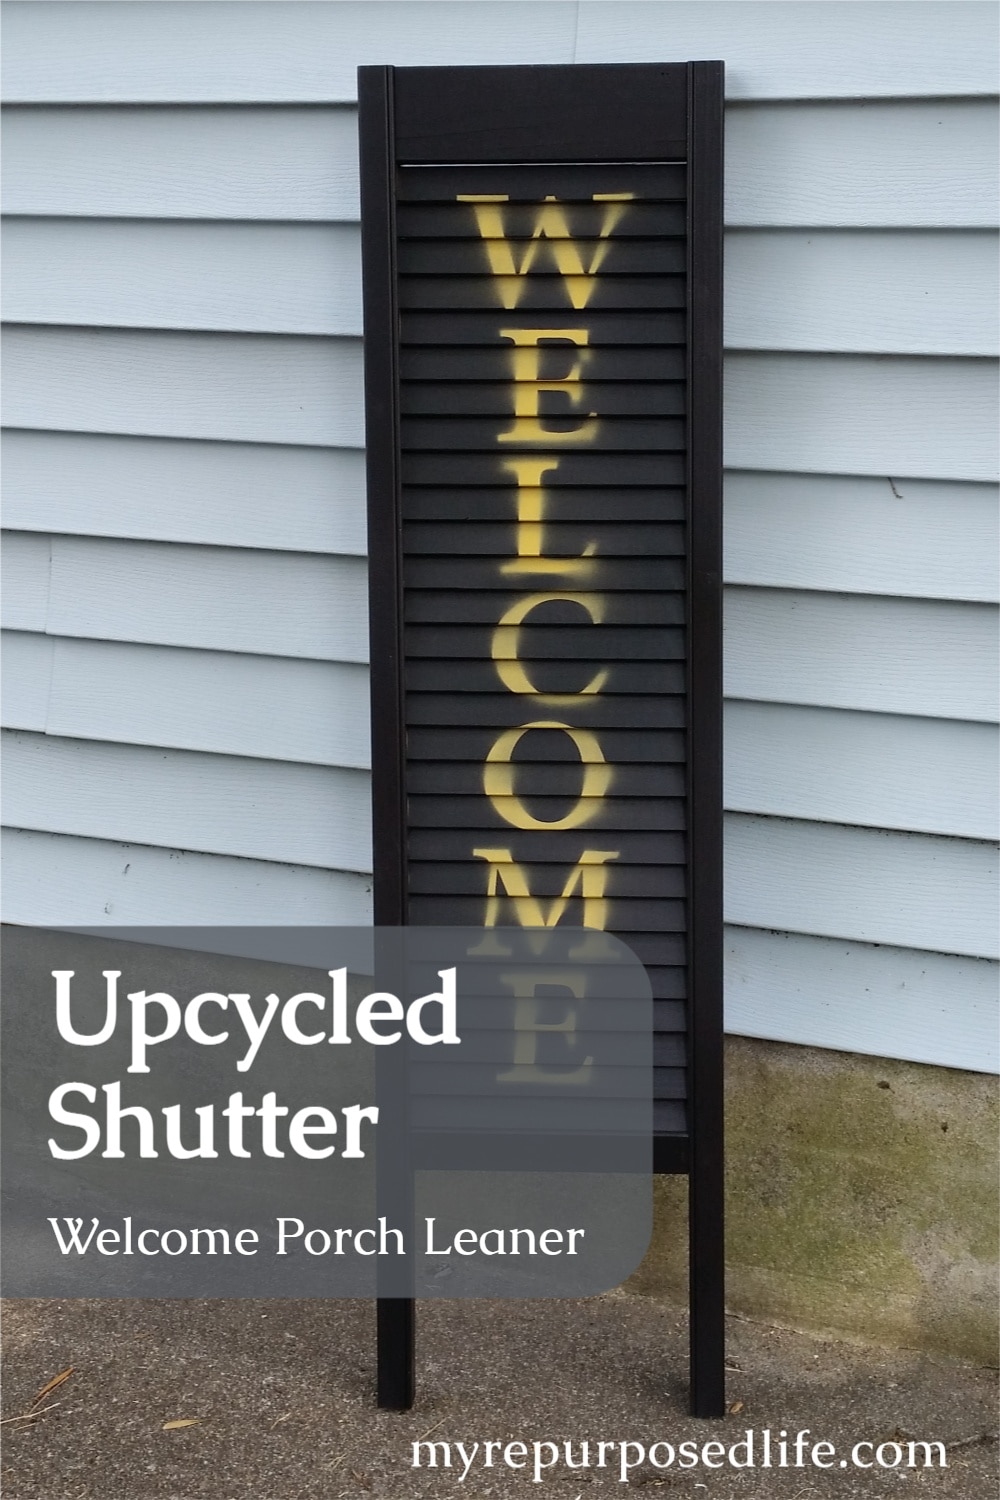 Fabulous DIY project using part of an old bi-fold door to make a Shutter Welcome Sign for the porch. Tips on painting and stenciling. #MyRepurposedLife #Fall #porch #decor #welcome #sign #shutter #project via @repurposedlife